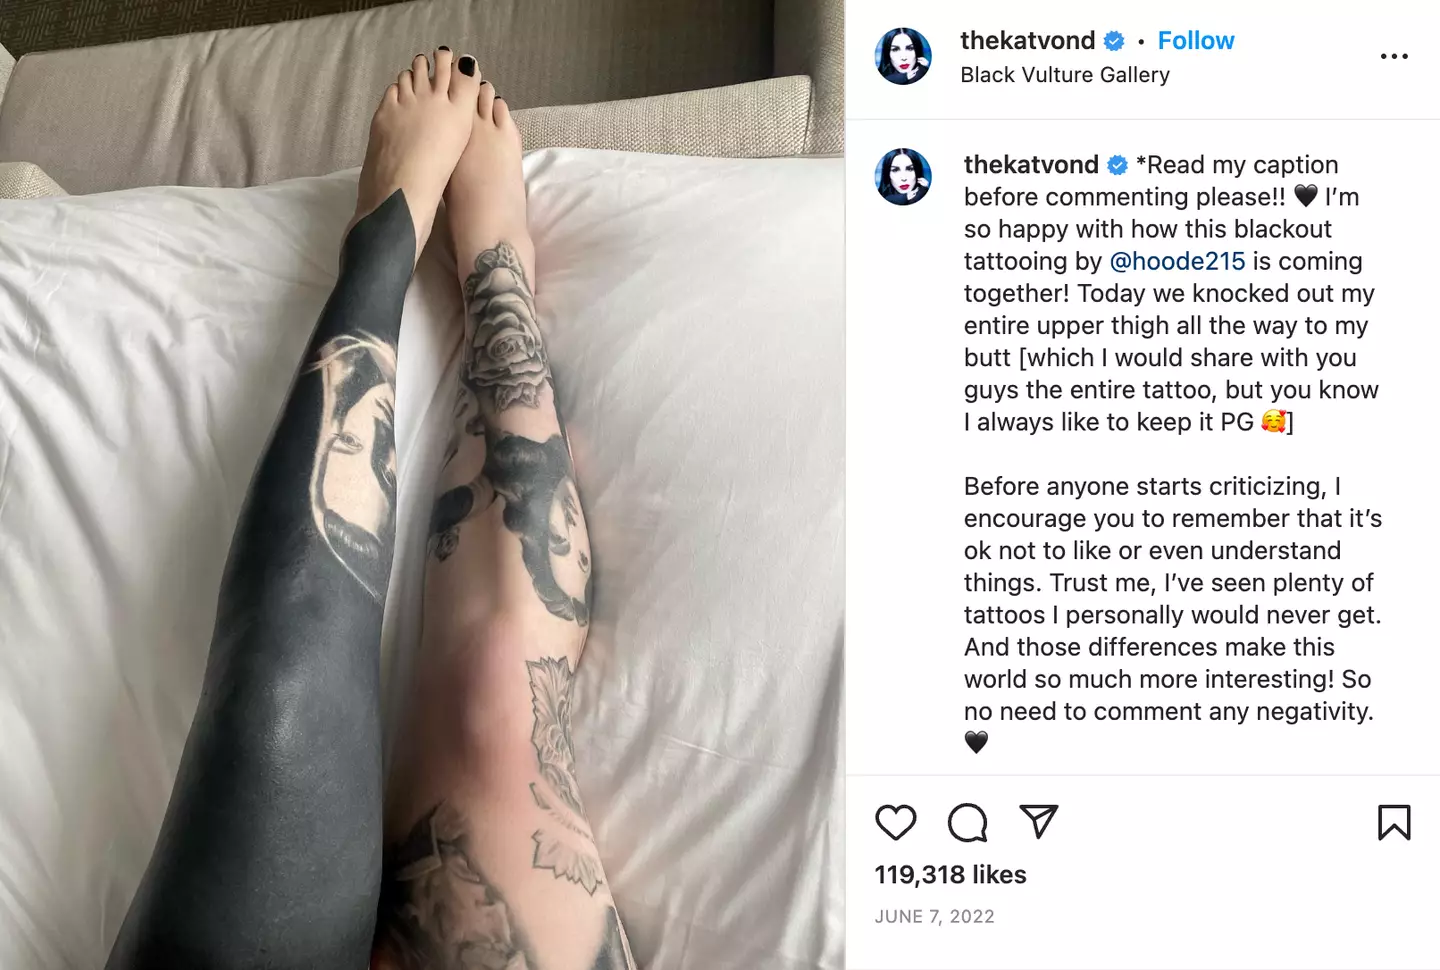 The artist has also blacked out her entire left leg, leaving only one tattoo visible.